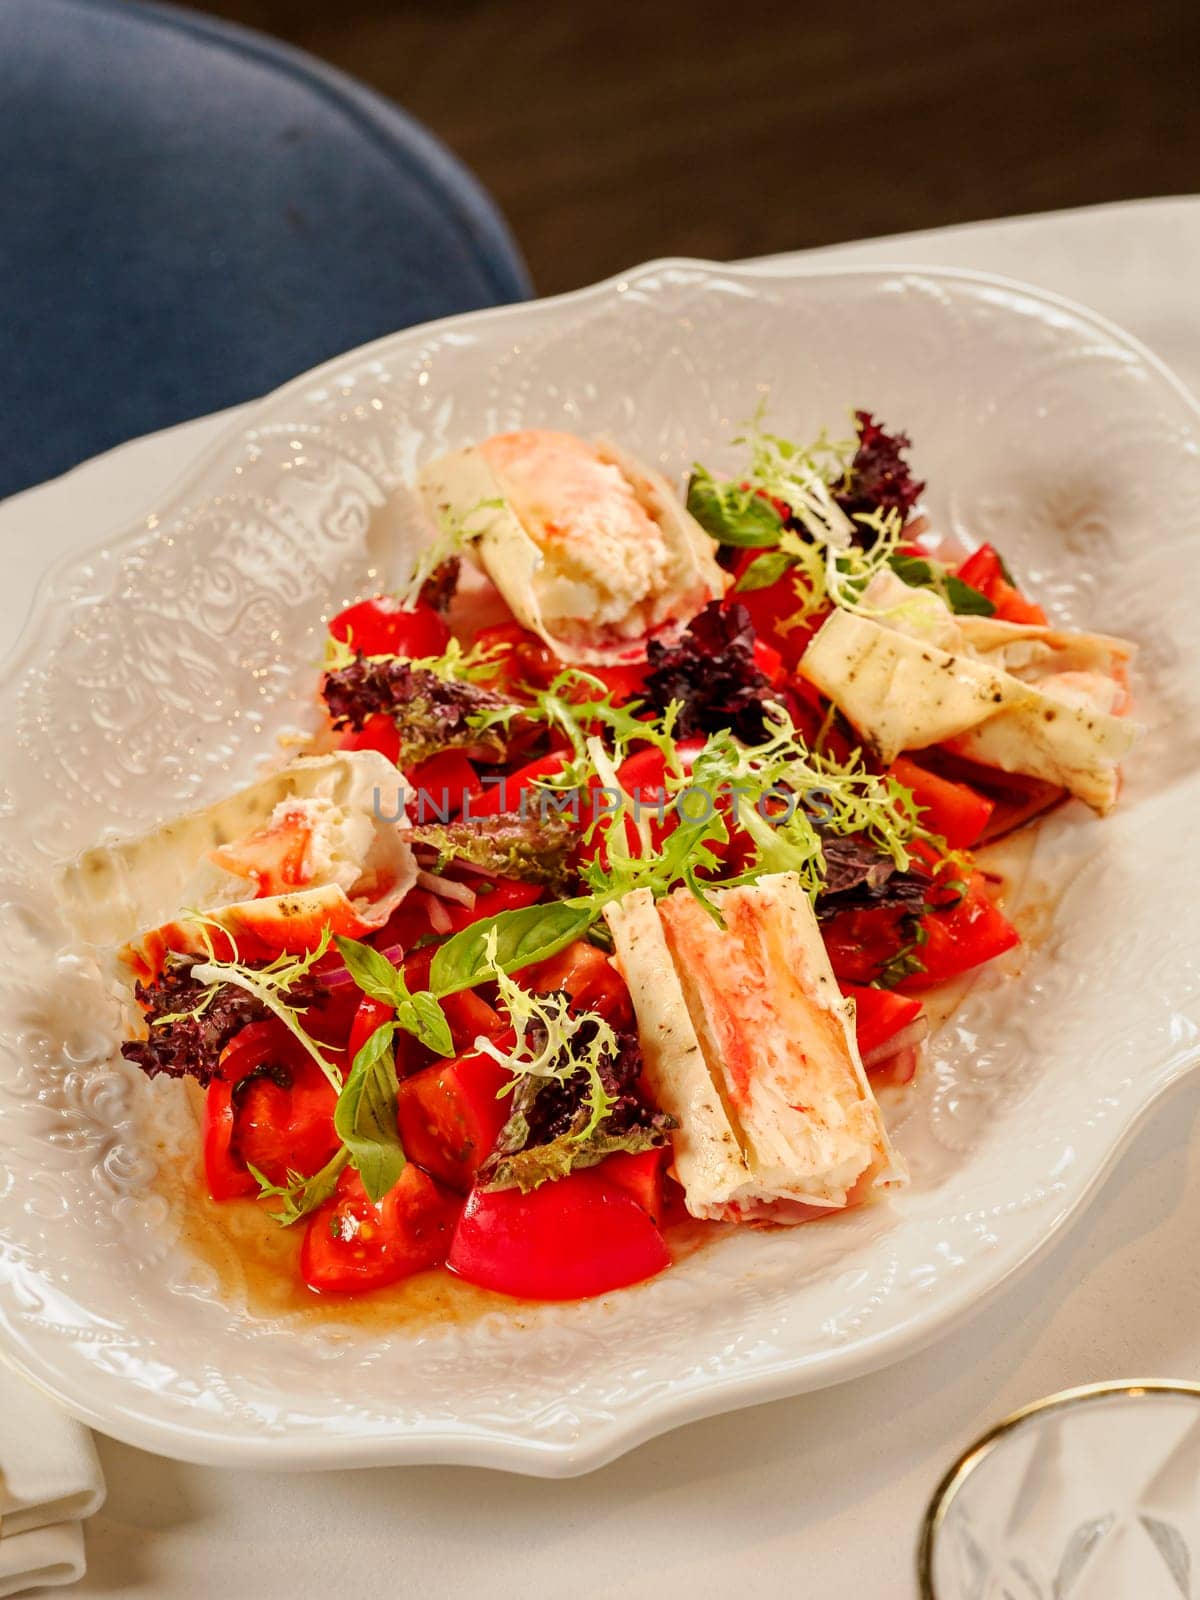 Delicious seafood crab salad on white plate on restaurant table background. Plate with healthy salad made with crab, tomatoes and fresh greens, decorated basil